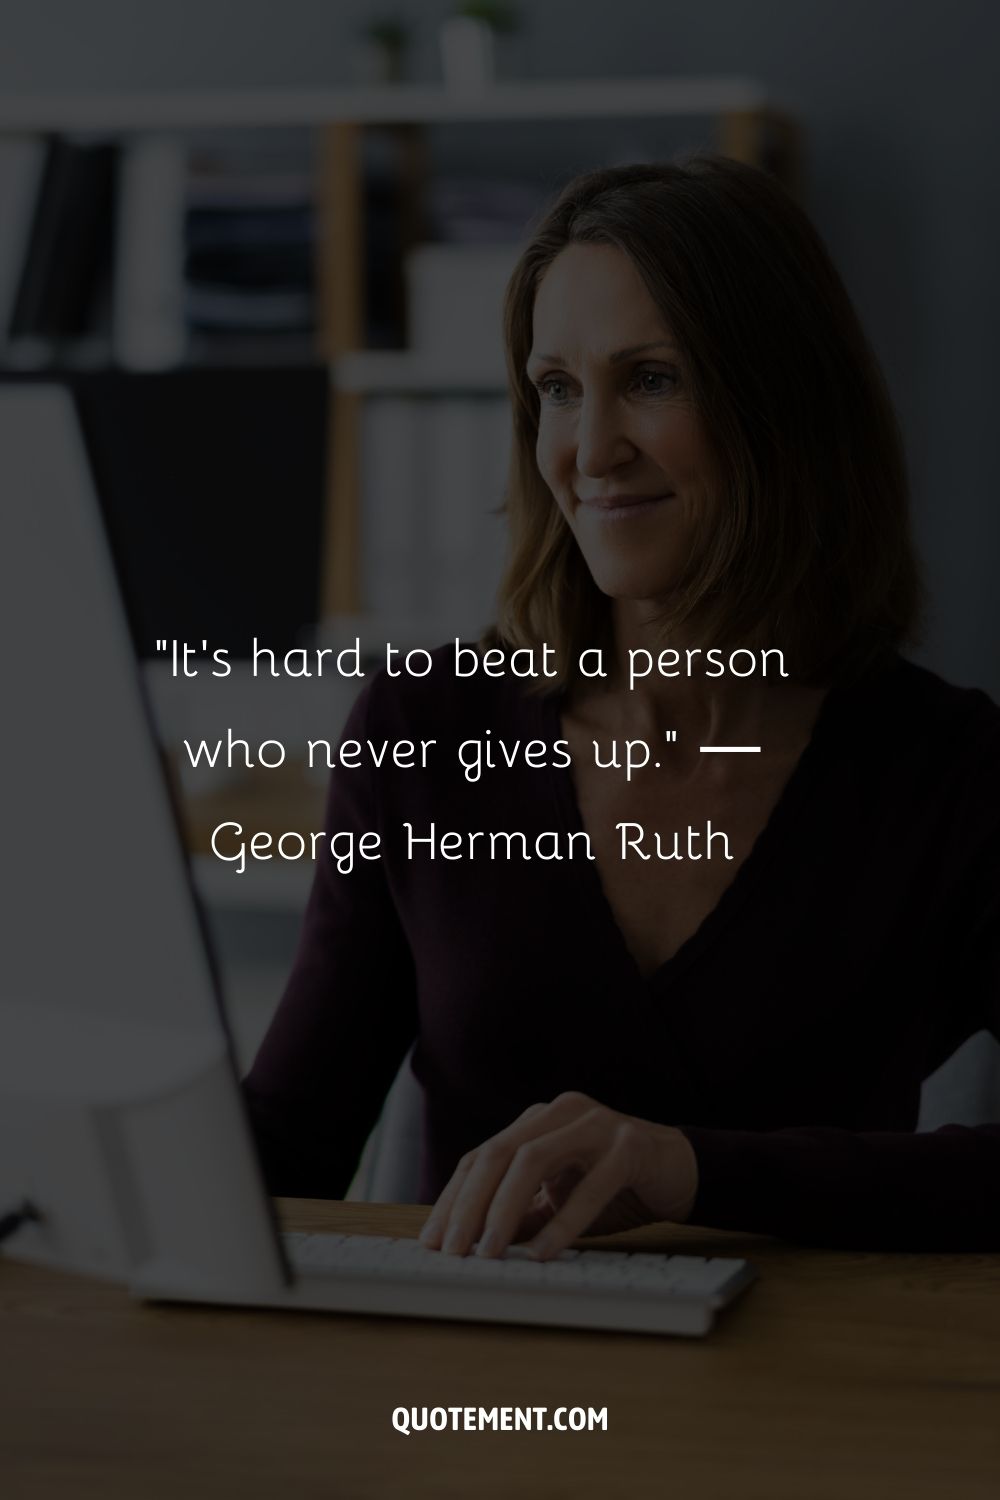 “It's hard to beat a person who never gives up.” ― George Herman Ruth